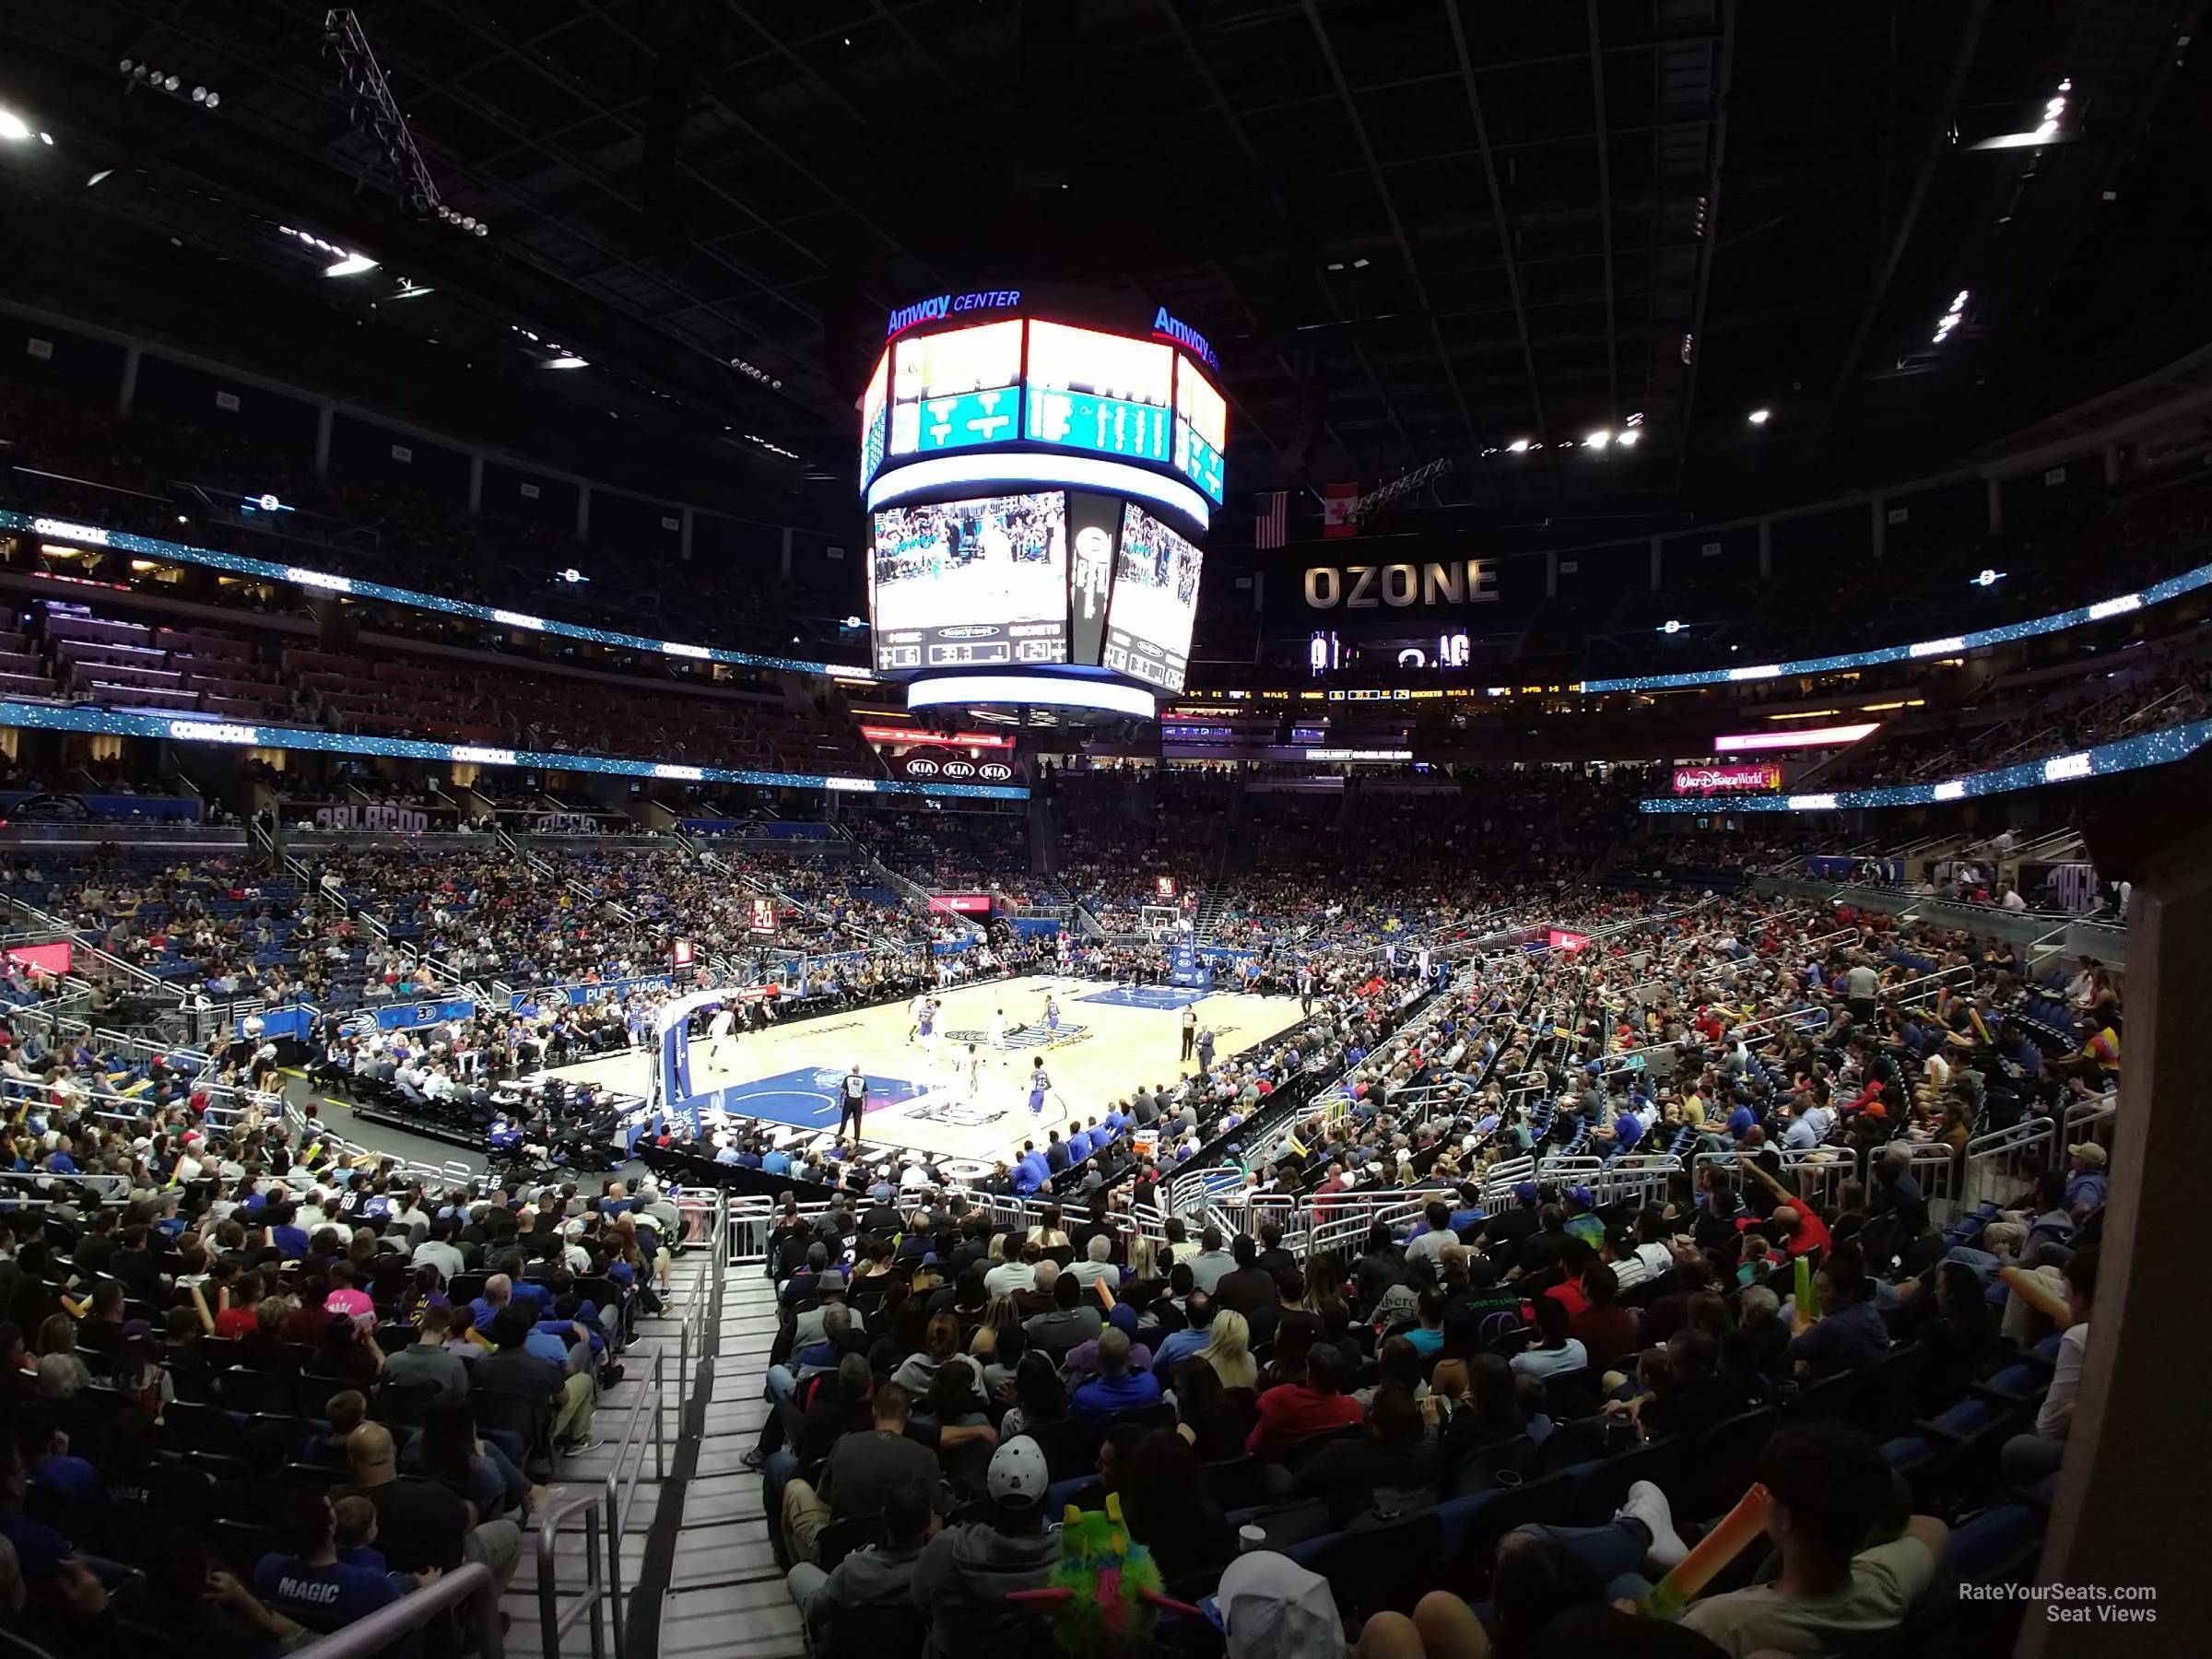 section 108, row 18 seat view  for basketball - amway center